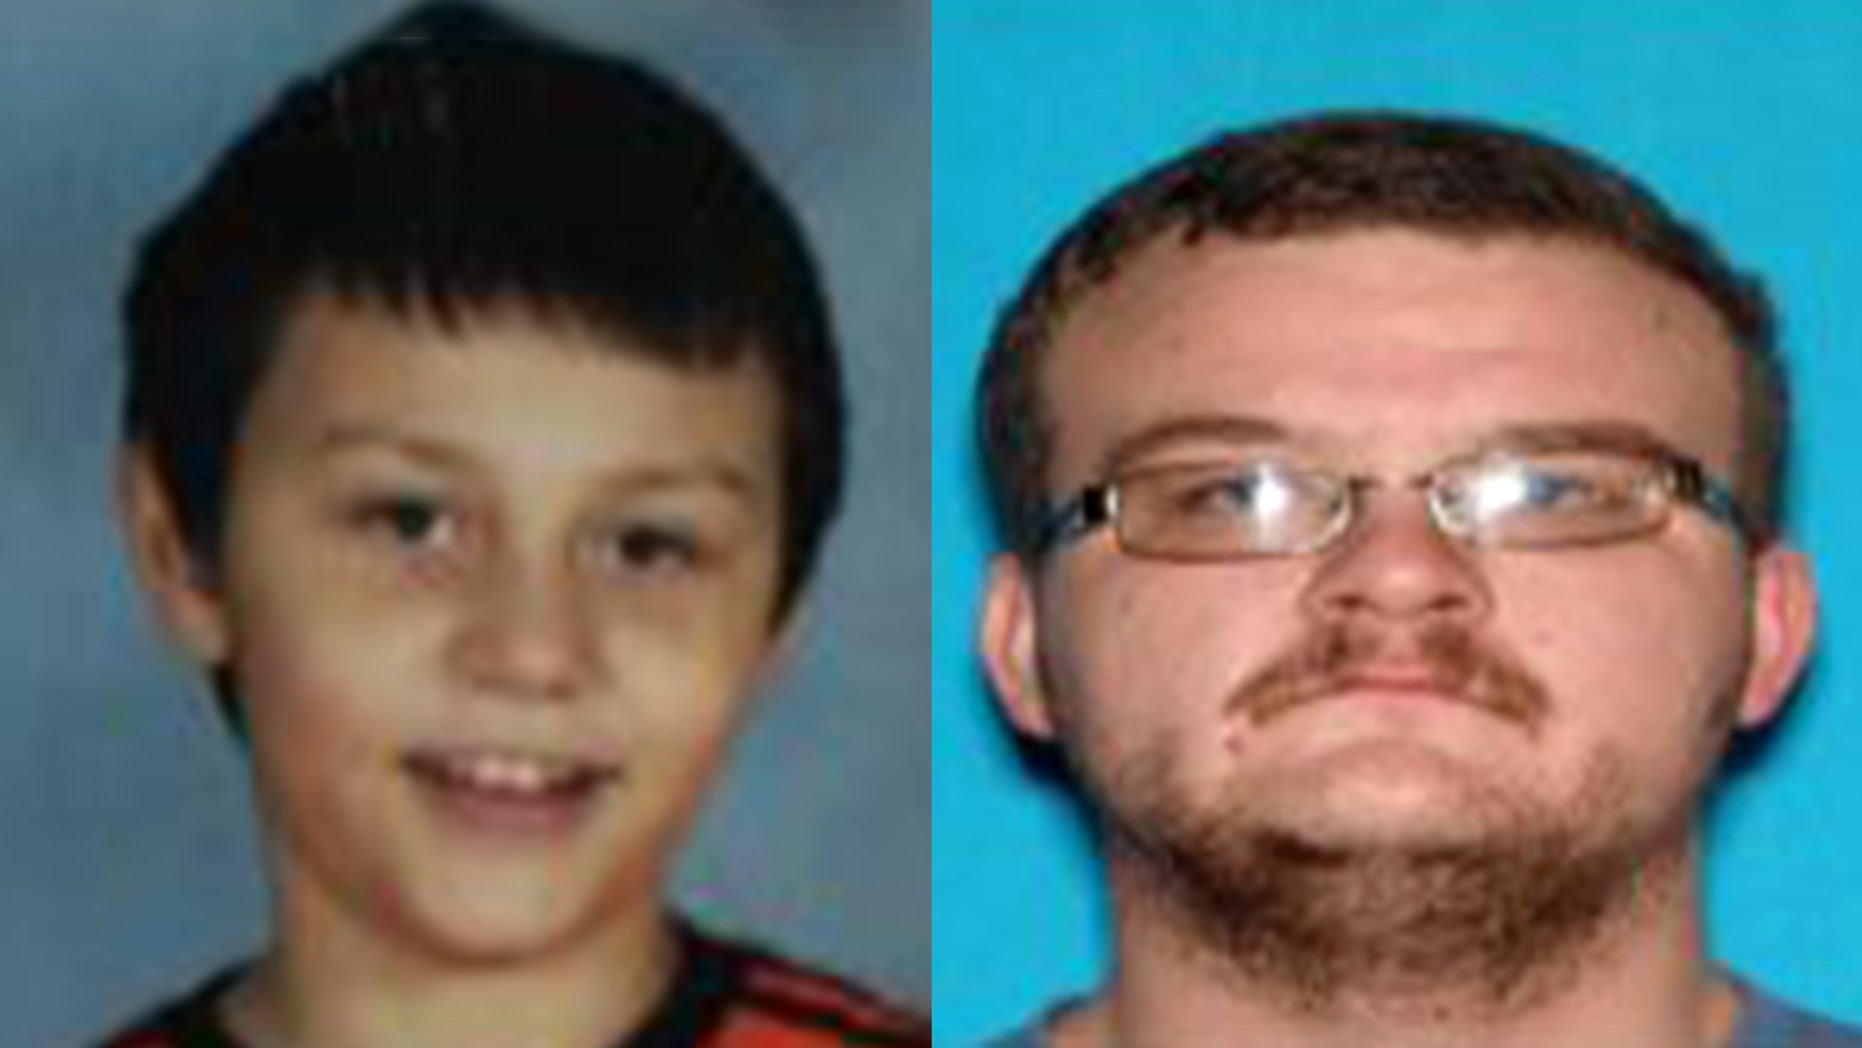 Amber Alert issued for missing autistic Kentucky boy